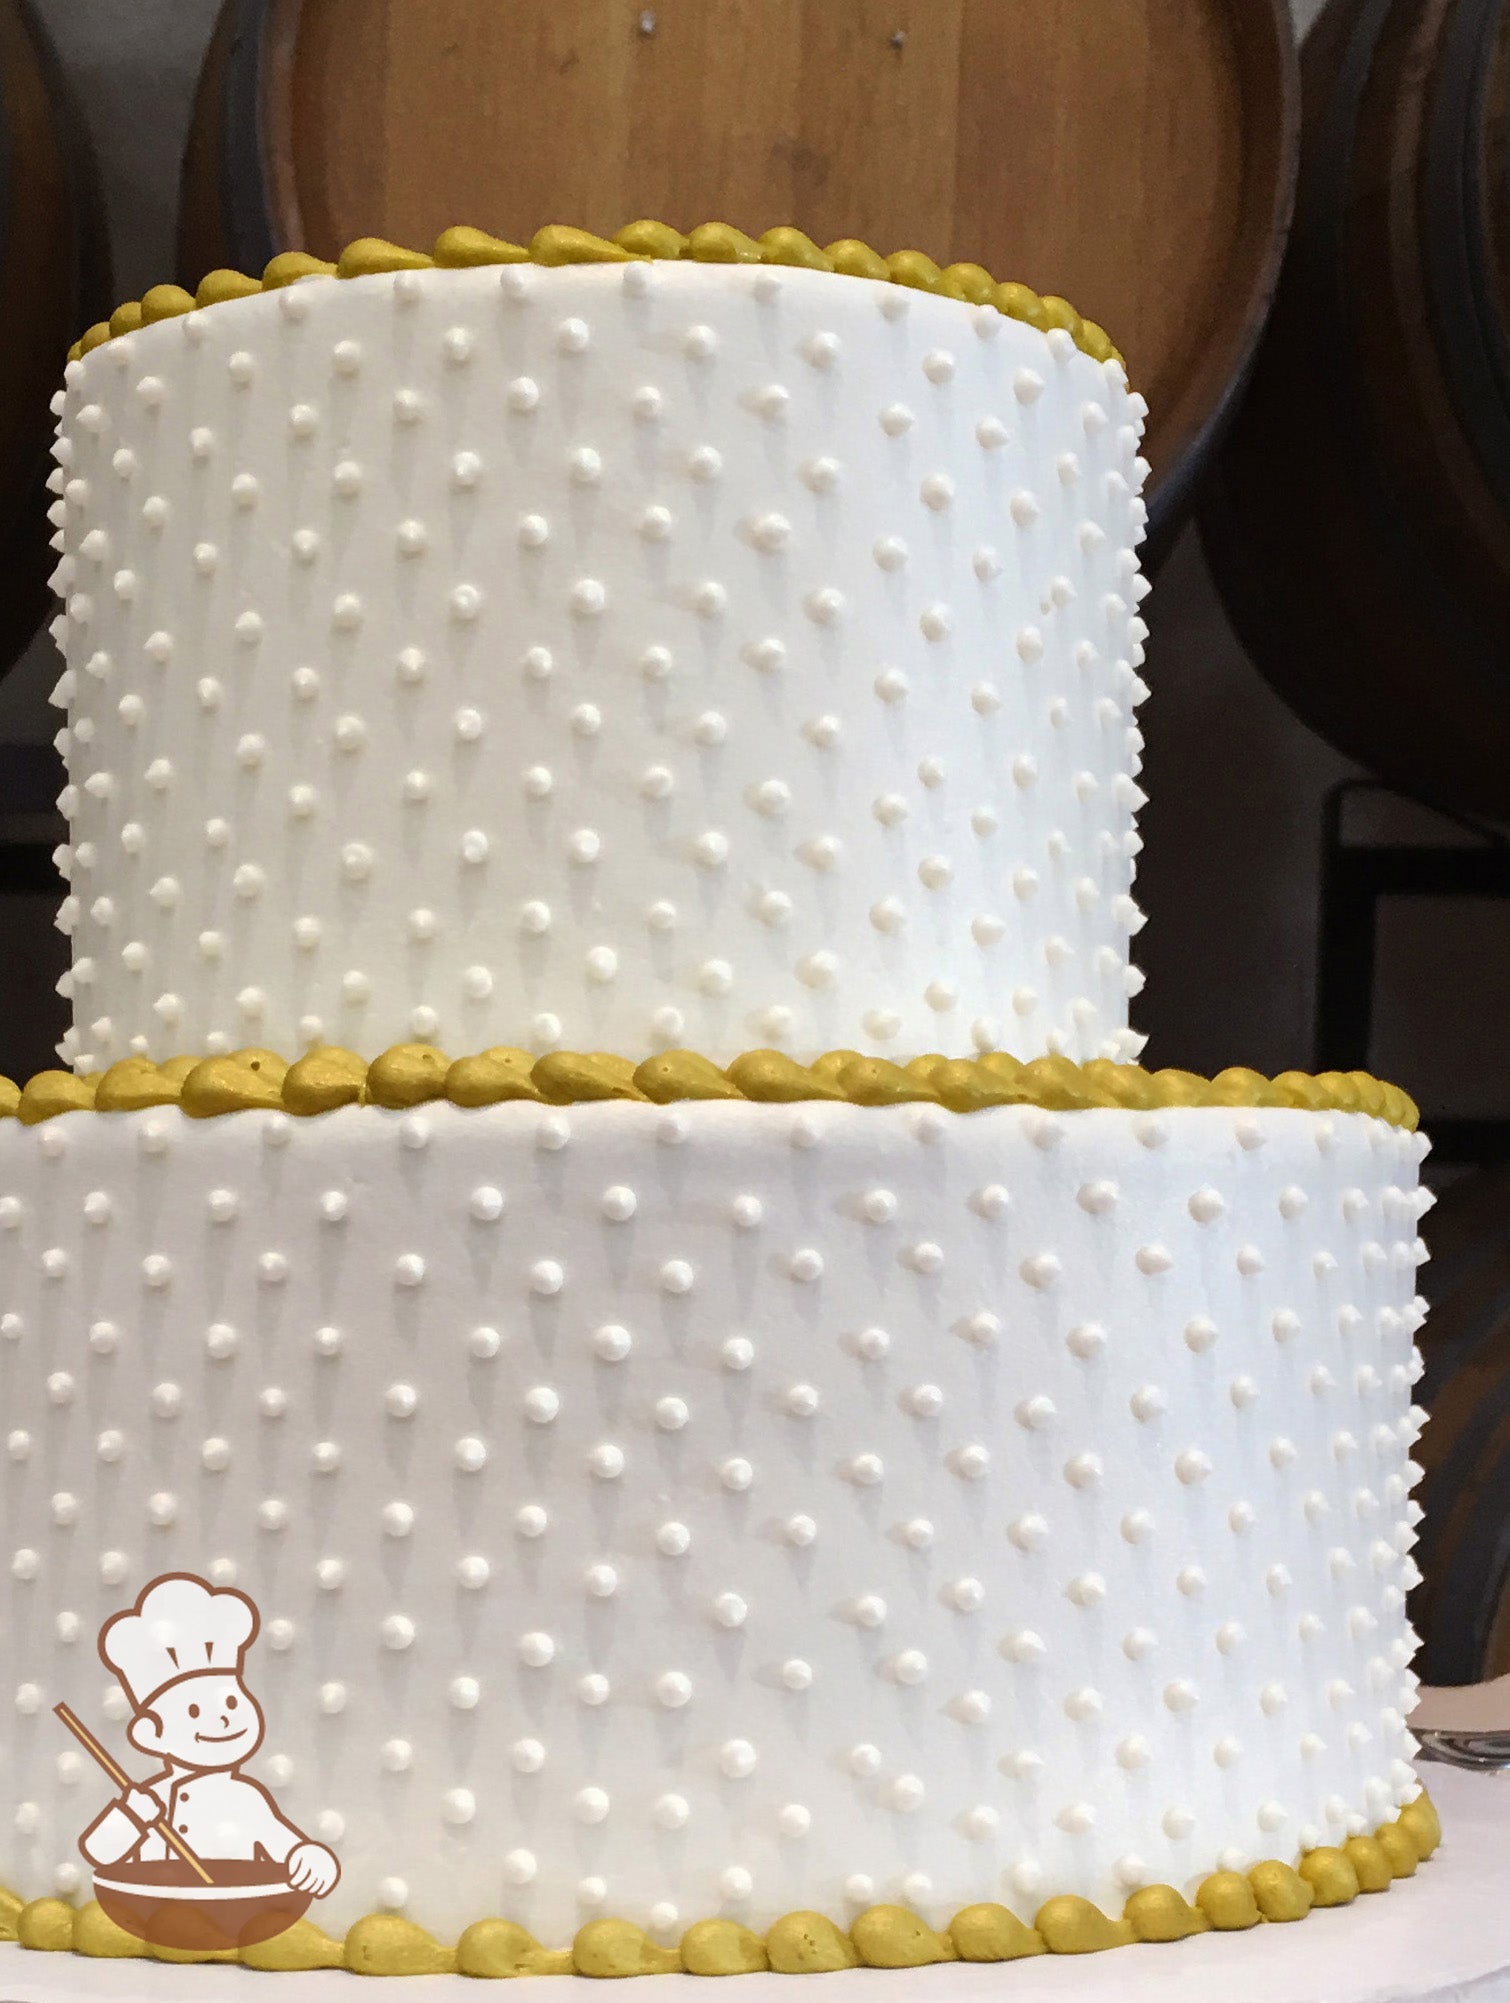 2-tier cake with smooth white icing and decorated with white buttercream dots and a yellow-gold beaded trim.